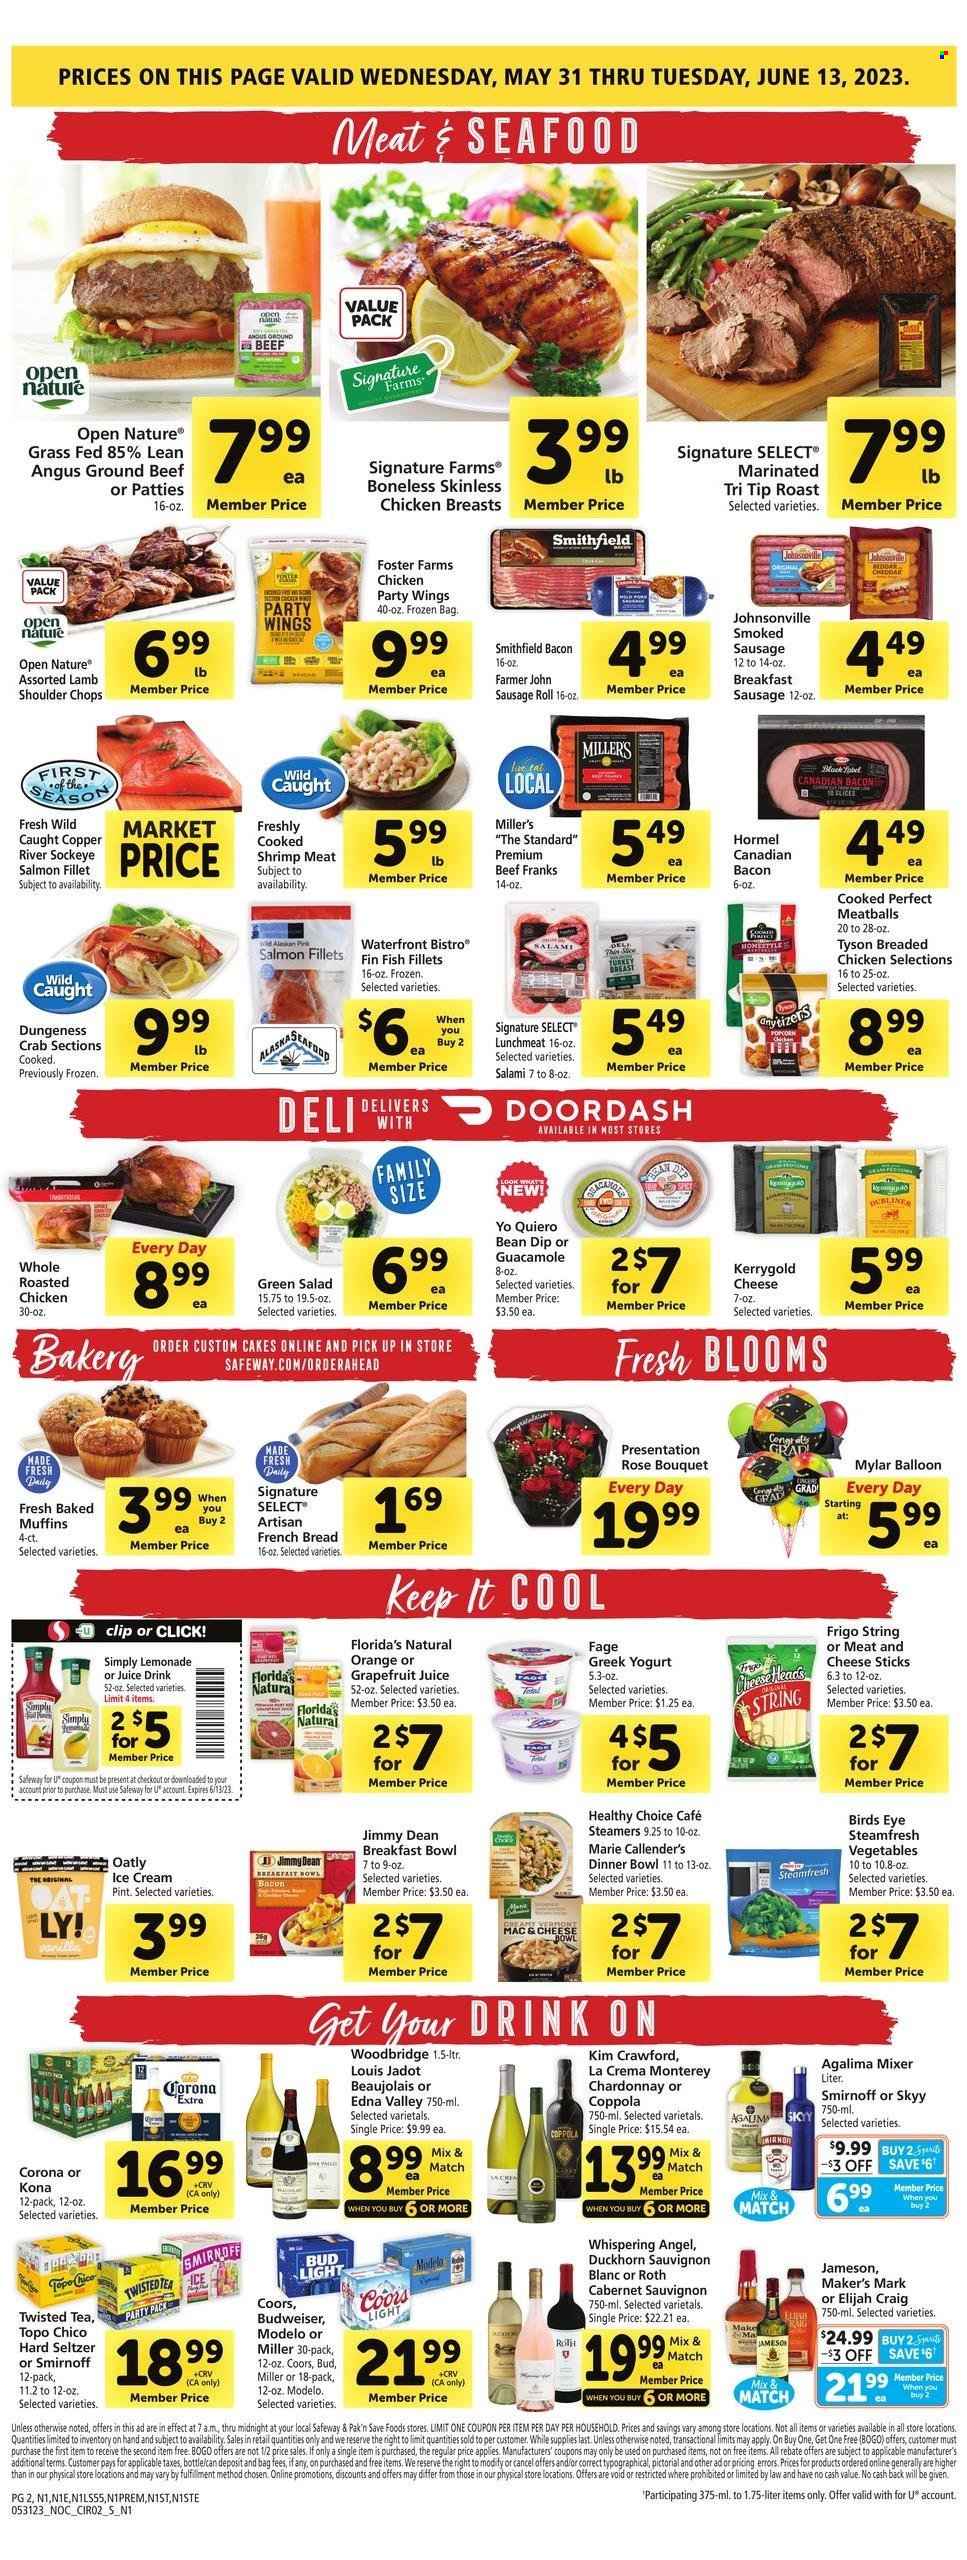 thumbnail - Safeway Flyer - 05/31/2023 - 06/06/2023 - Sales products - bread, sausage rolls, cake, french bread, muffin, oranges, beef meat, ground beef, roast, Johnsonville, lamb meat, lamb shoulder, fish fillets, salmon, salmon fillet, seafood, crab, fish, chicken roast, meatballs, fried chicken, breakfast bowl, Bird's Eye, Healthy Choice, Marie Callender's, Jimmy Dean, Hormel, ready meal, bacon, canadian bacon, salami, smoked sausage, frankfurters, lunch meat, greek yoghurt, dip, ice cream, cheese sticks, Florida's Natural, guacamole, lemonade, juice, ice tea, Cabernet Sauvignon, red wine, white wine, Chardonnay, wine, Woodbridge, Kim Crawford, Smirnoff, whiskey, Jameson, SKYY, Hard Seltzer, beer, Bud Light, Corona Extra, Modelo, Topo Chico, pin, balloons, bouquet, rose, Budweiser, Coors, Twisted Tea. Page 2.